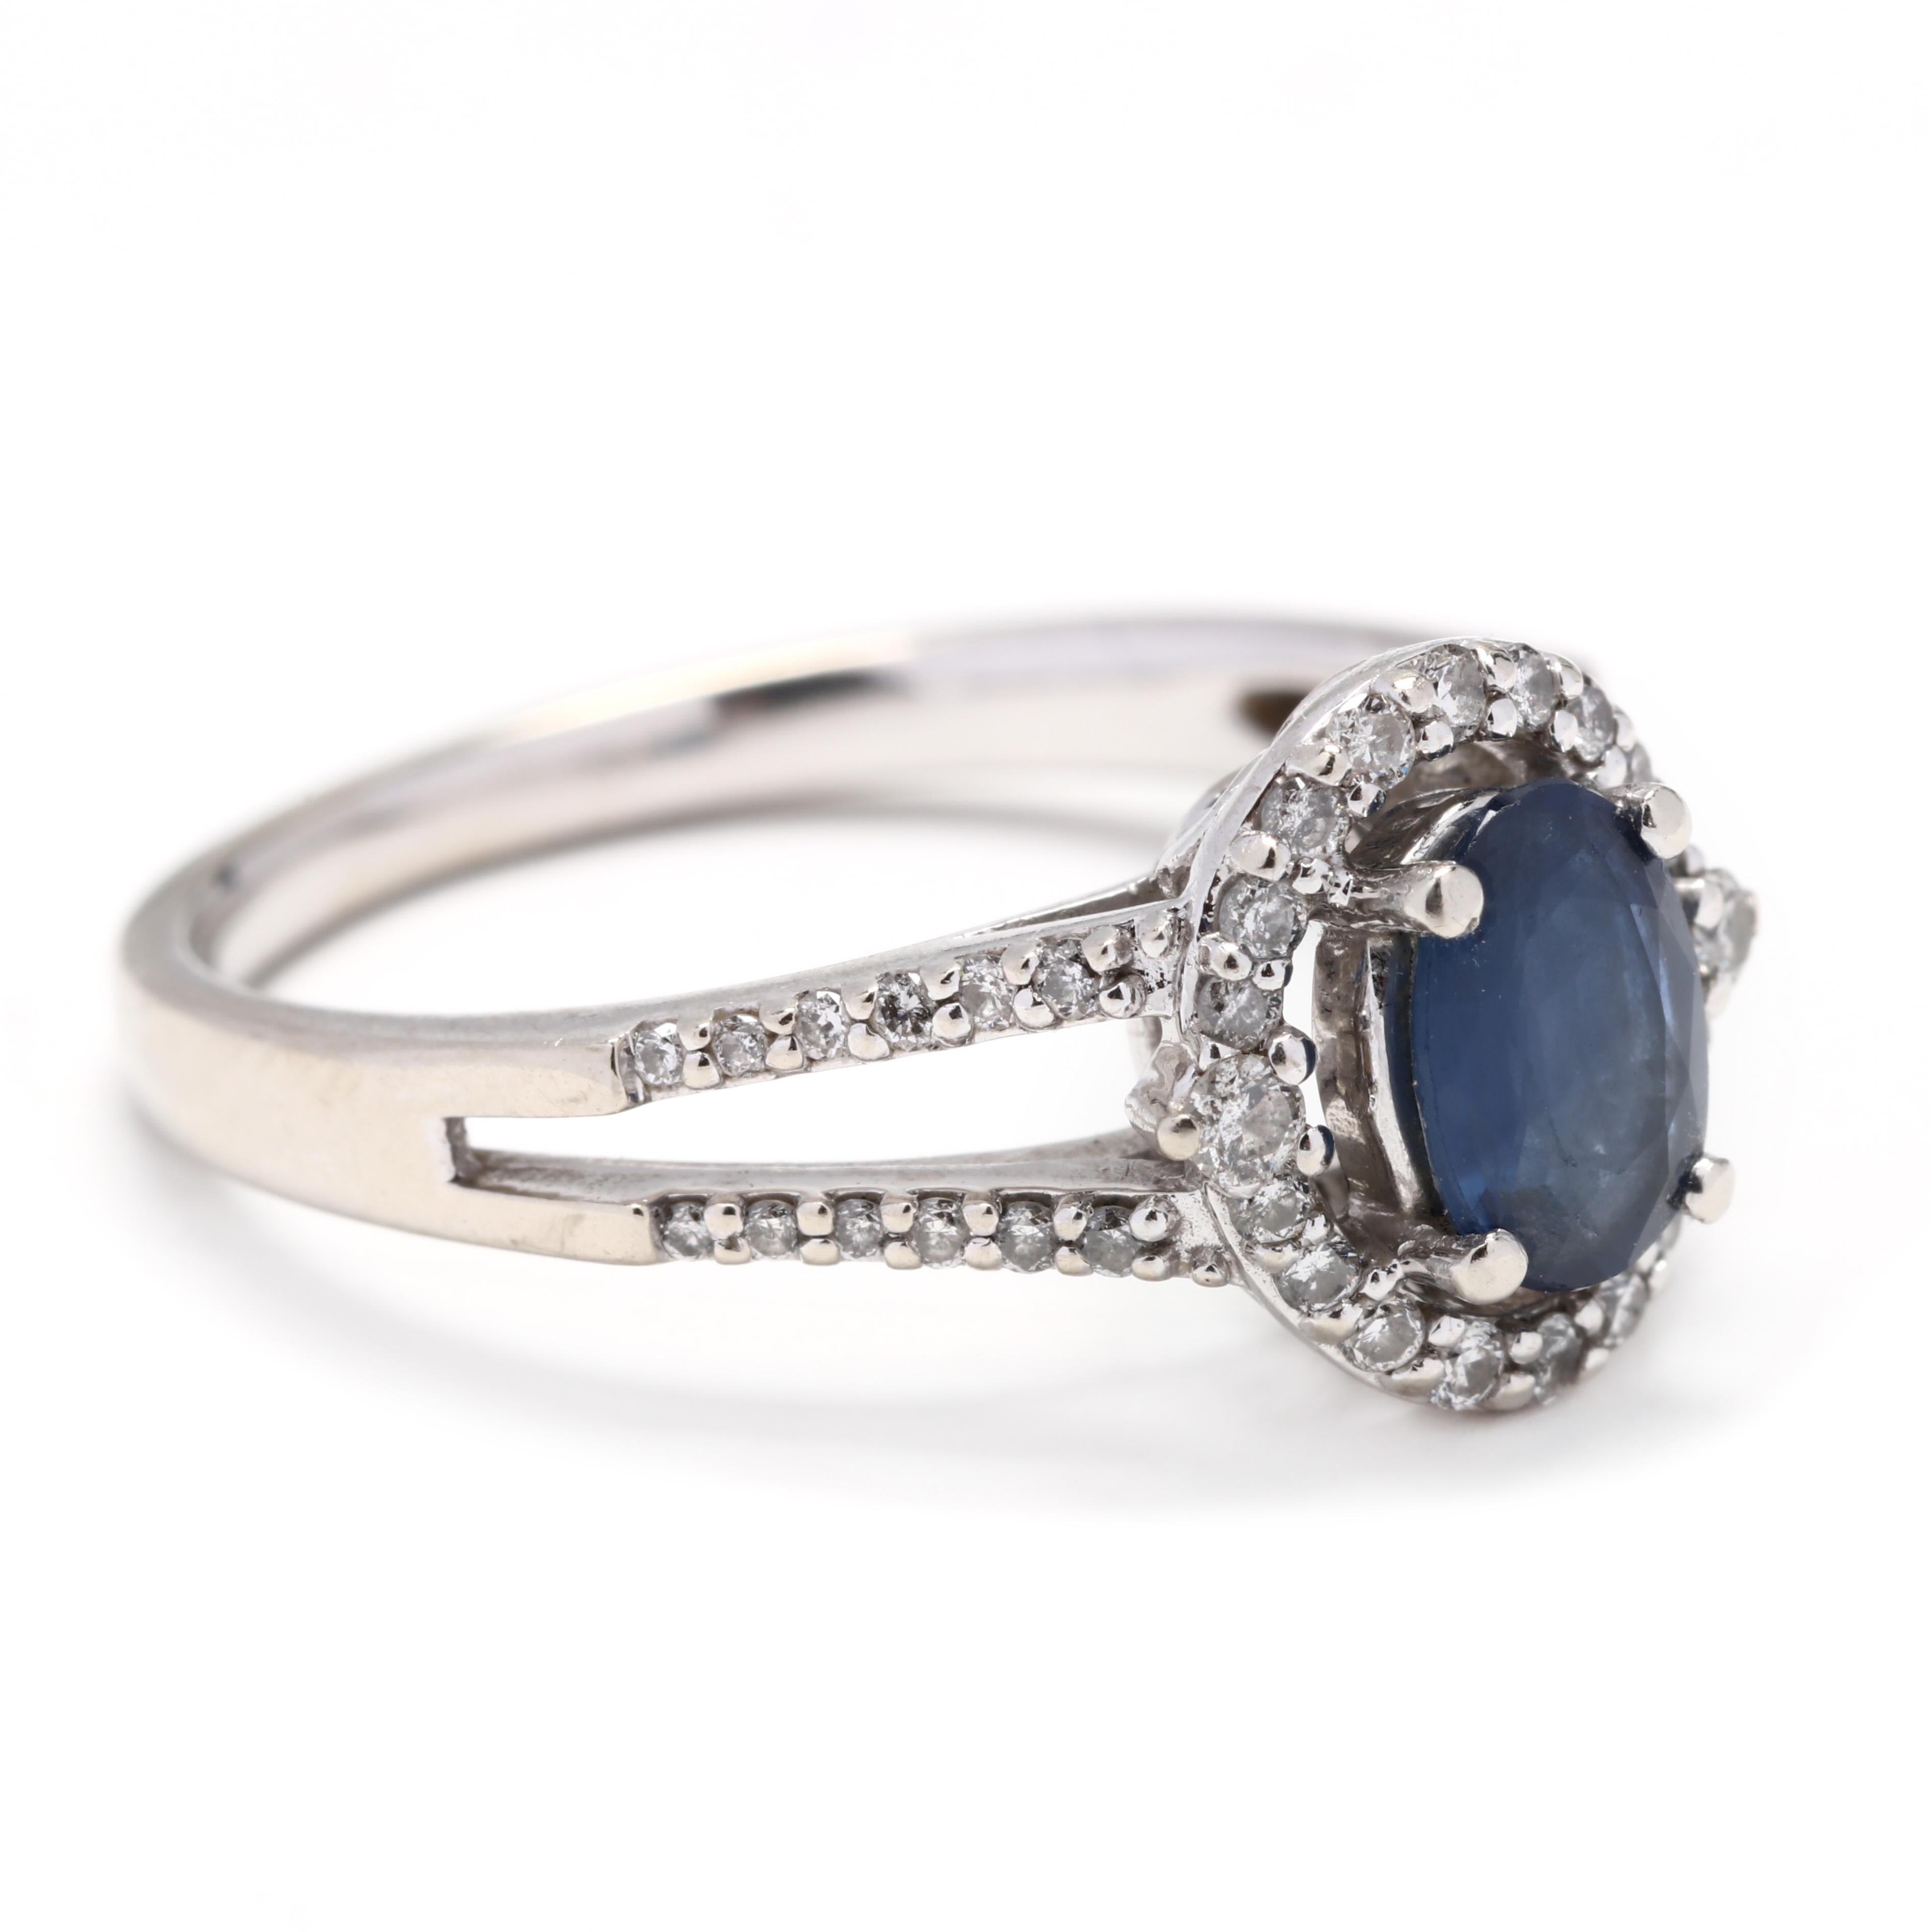 10k white gold, blue stone & diamond halo ring. An oval blue stone set in a diamond halo with a two row band or, split shank. The band is also set with diamonds for an elegant look. A great engagement ring or right-hand ring!

Stones:
- blue stone,